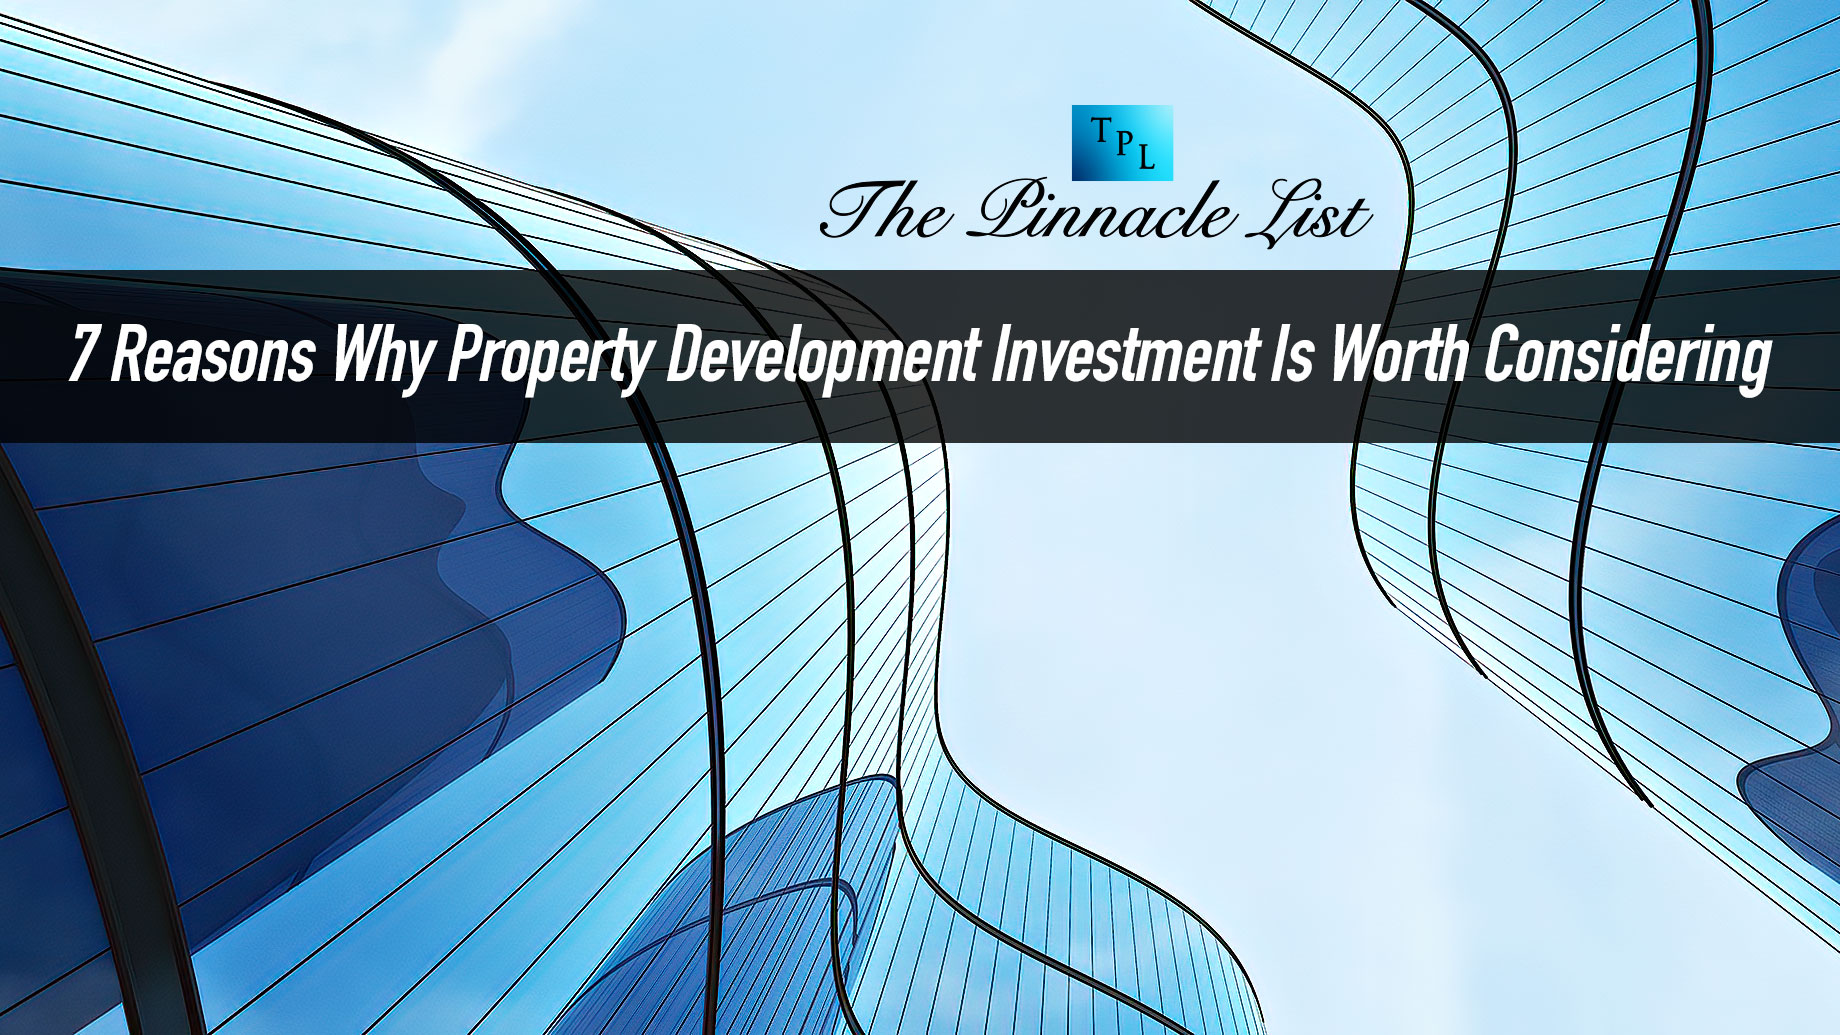 7 Reasons Why Property Development Investment Is Worth Considering